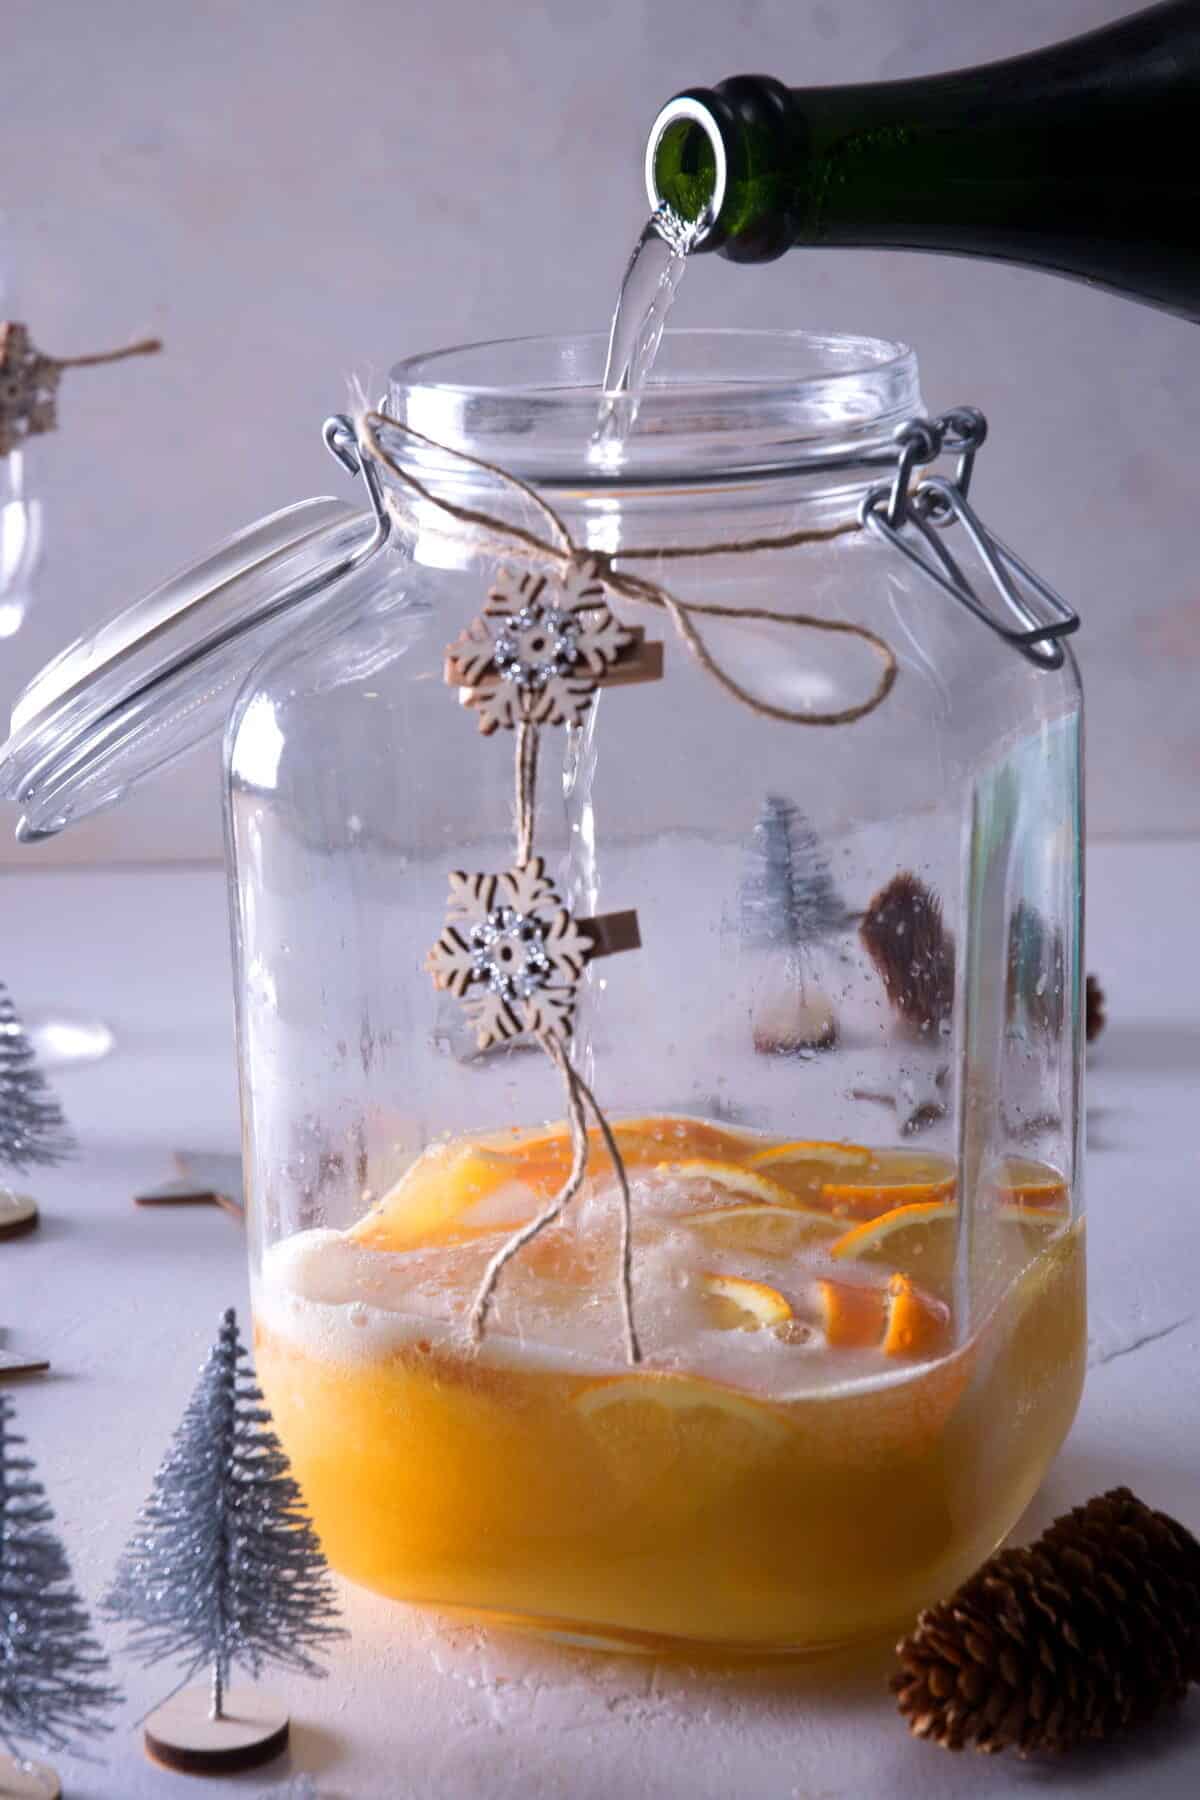 Champagne pouring into a large glass pitcher with orange juice.